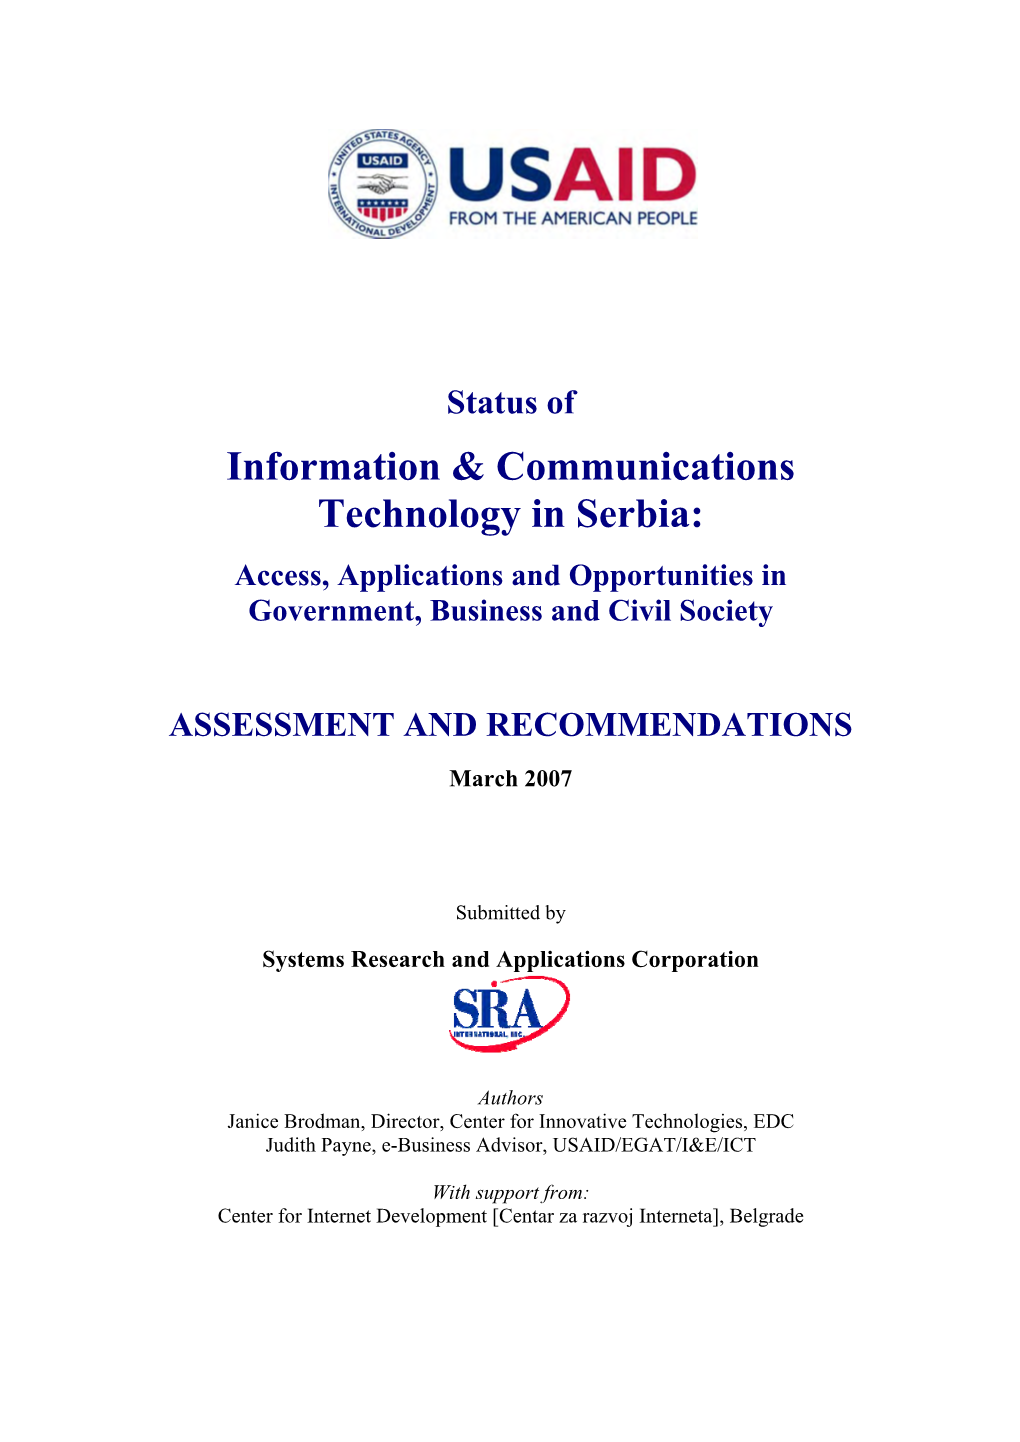 Information & Communications Technology in Serbia